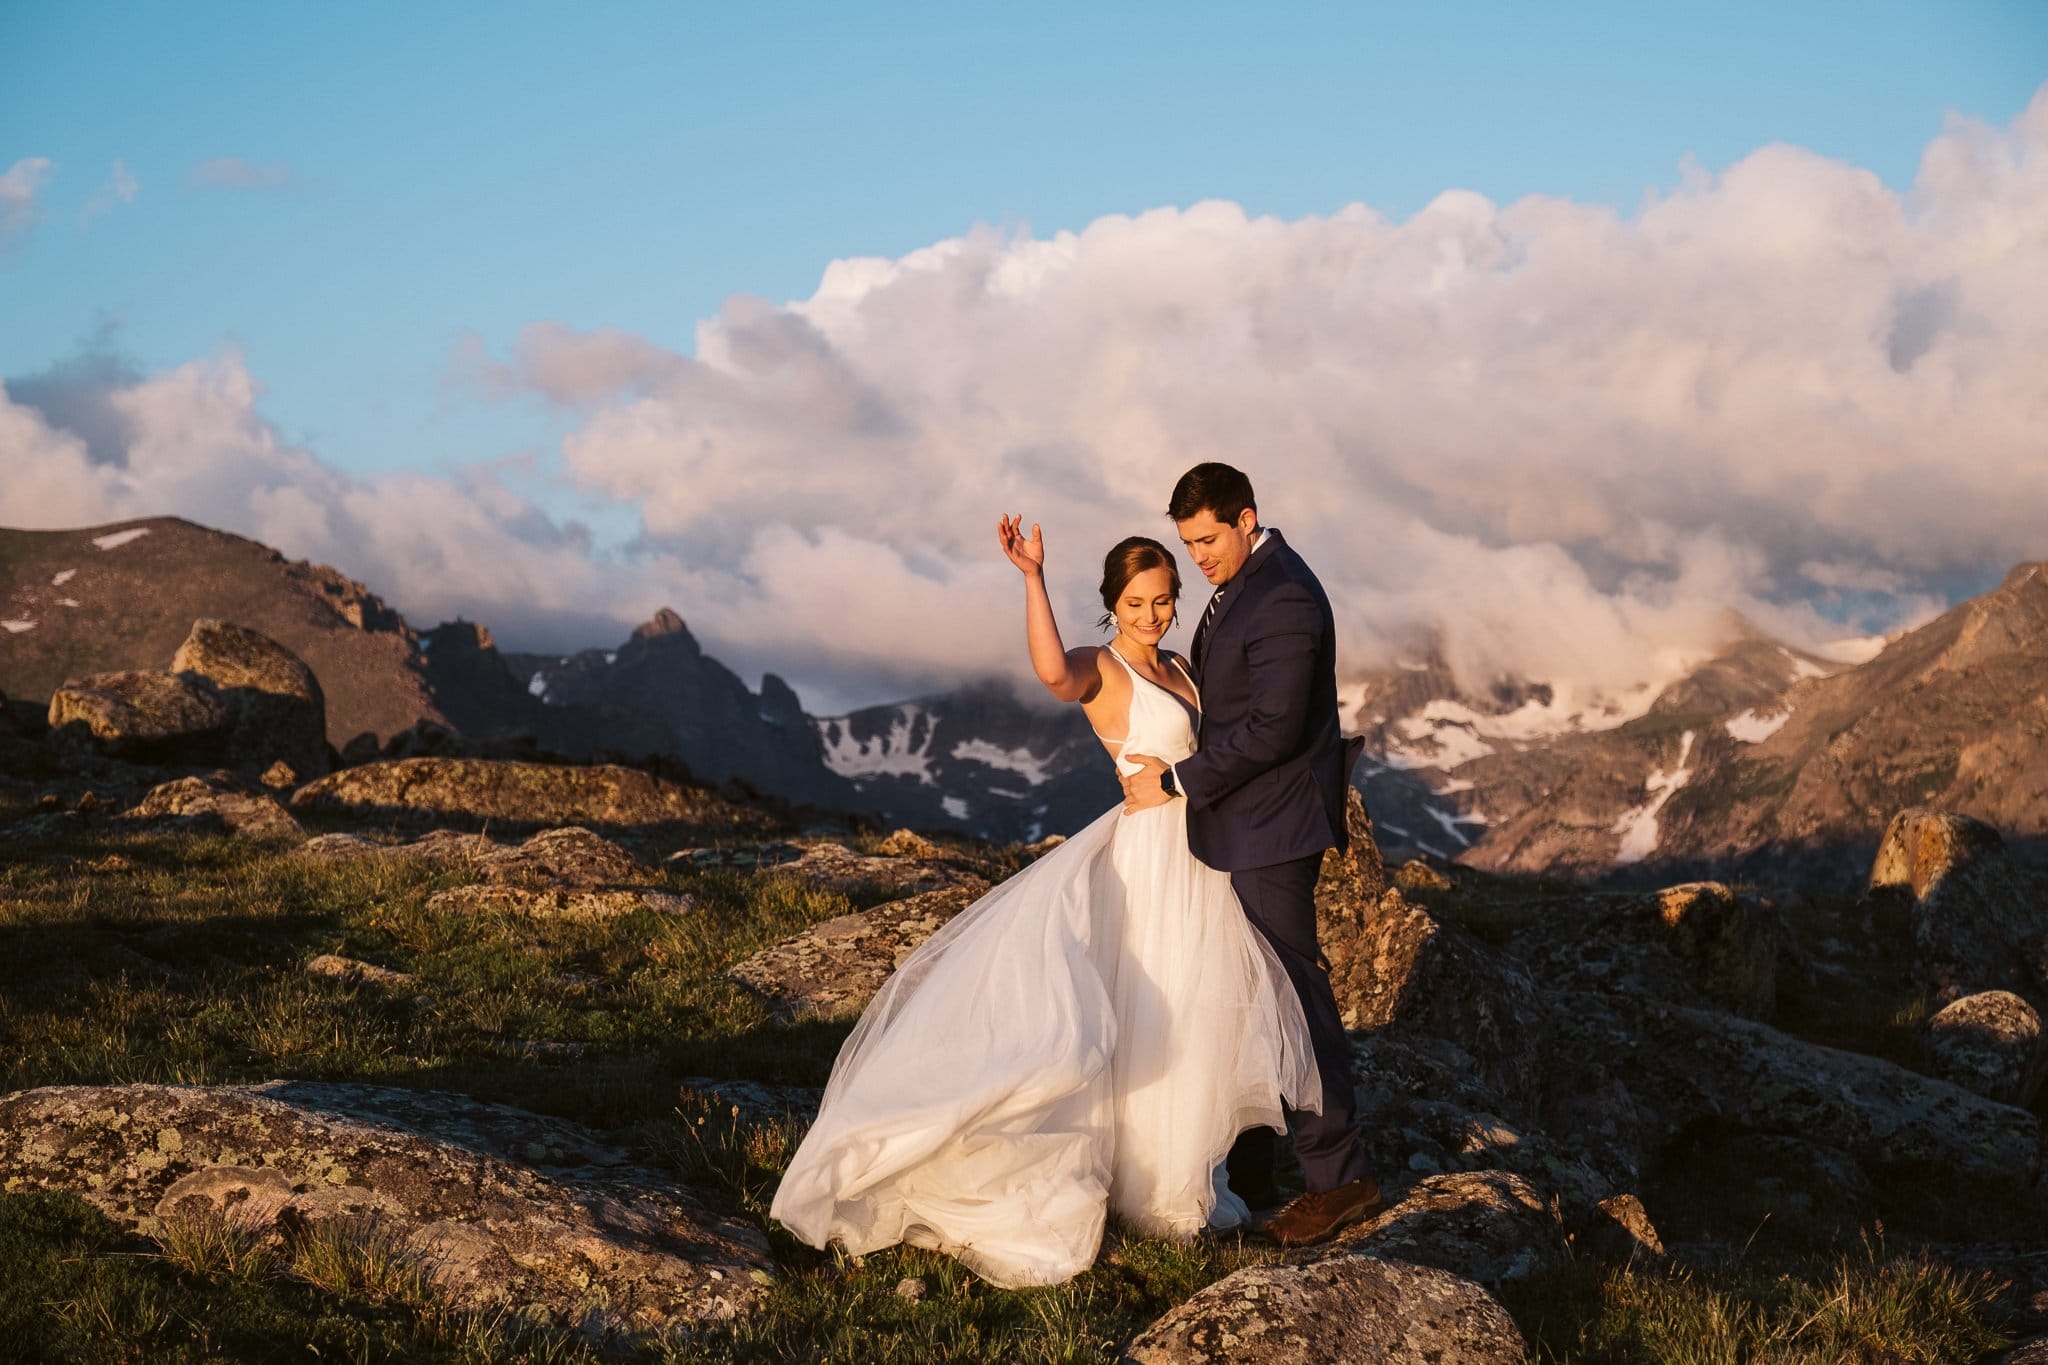 Colorado adventure elopement at sunrise, hiking wedding in the Rocky Mountains